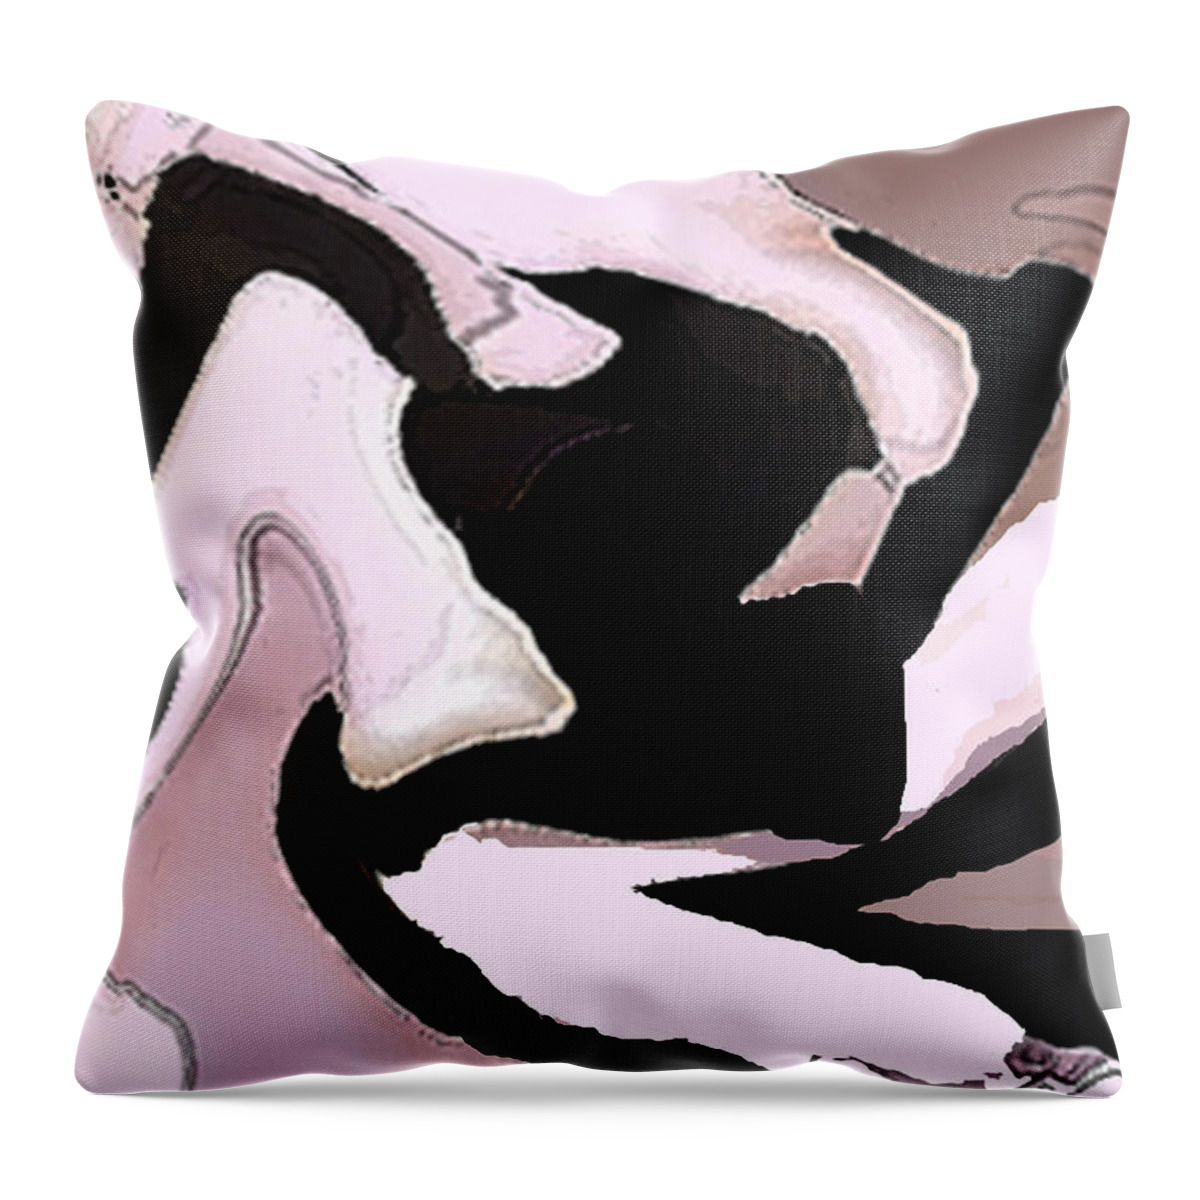 Female Abstract Art Paintings Throw Pillow featuring the painting A Moment Of Love by RjFxx at beautifullart com Friedenthal